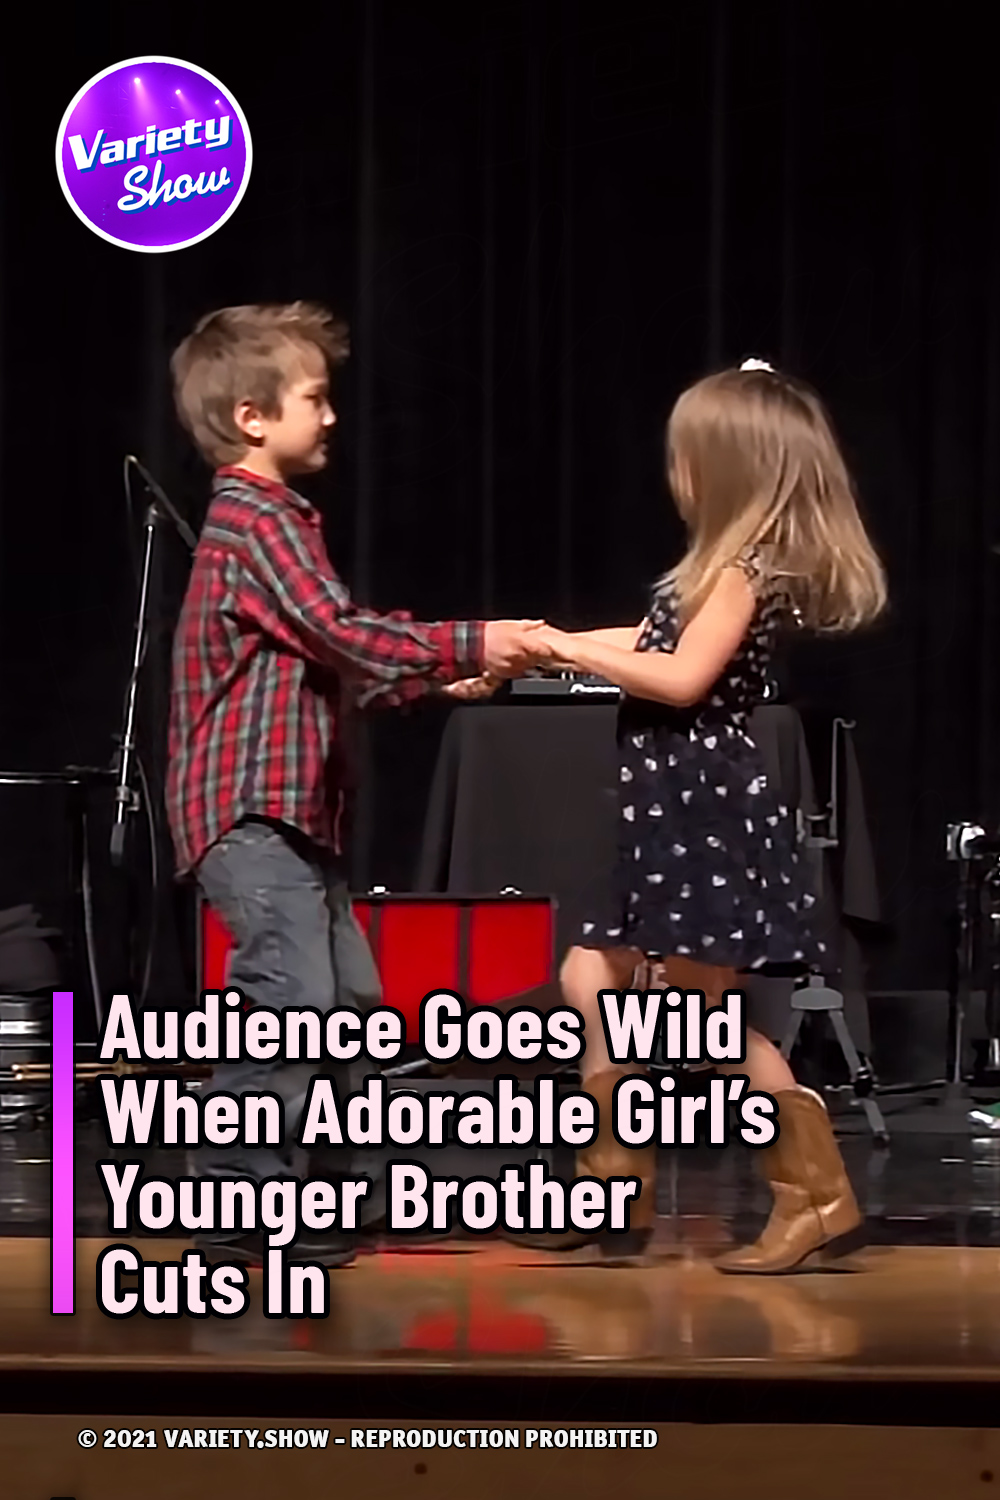 Audience Goes Wild When Adorable Girl’s Younger Brother Cuts In